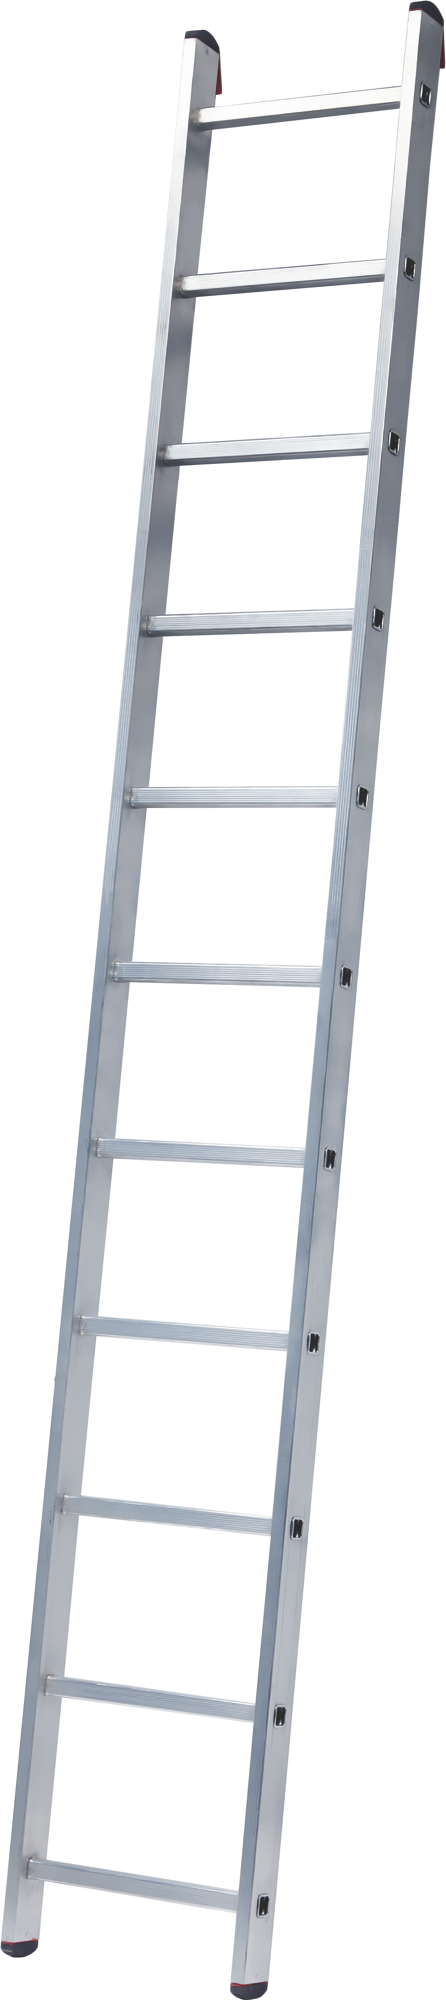 Aluminum single-section industrial leaning ladder NV5210